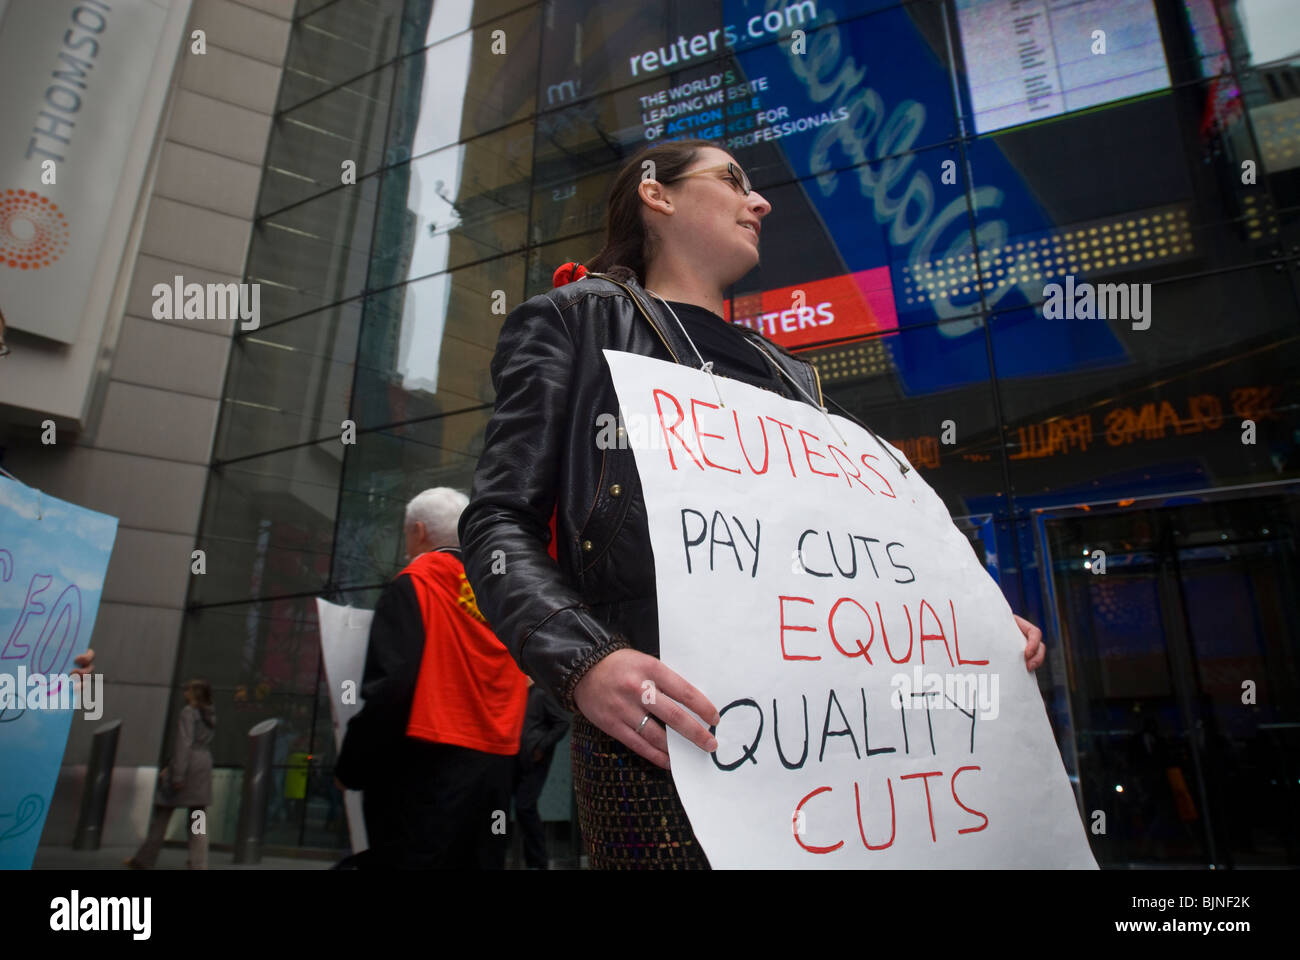 Members of the Newspaper guild of New York protest outside of the New York headquarters of Thomson Reuters in Times Square Stock Photo